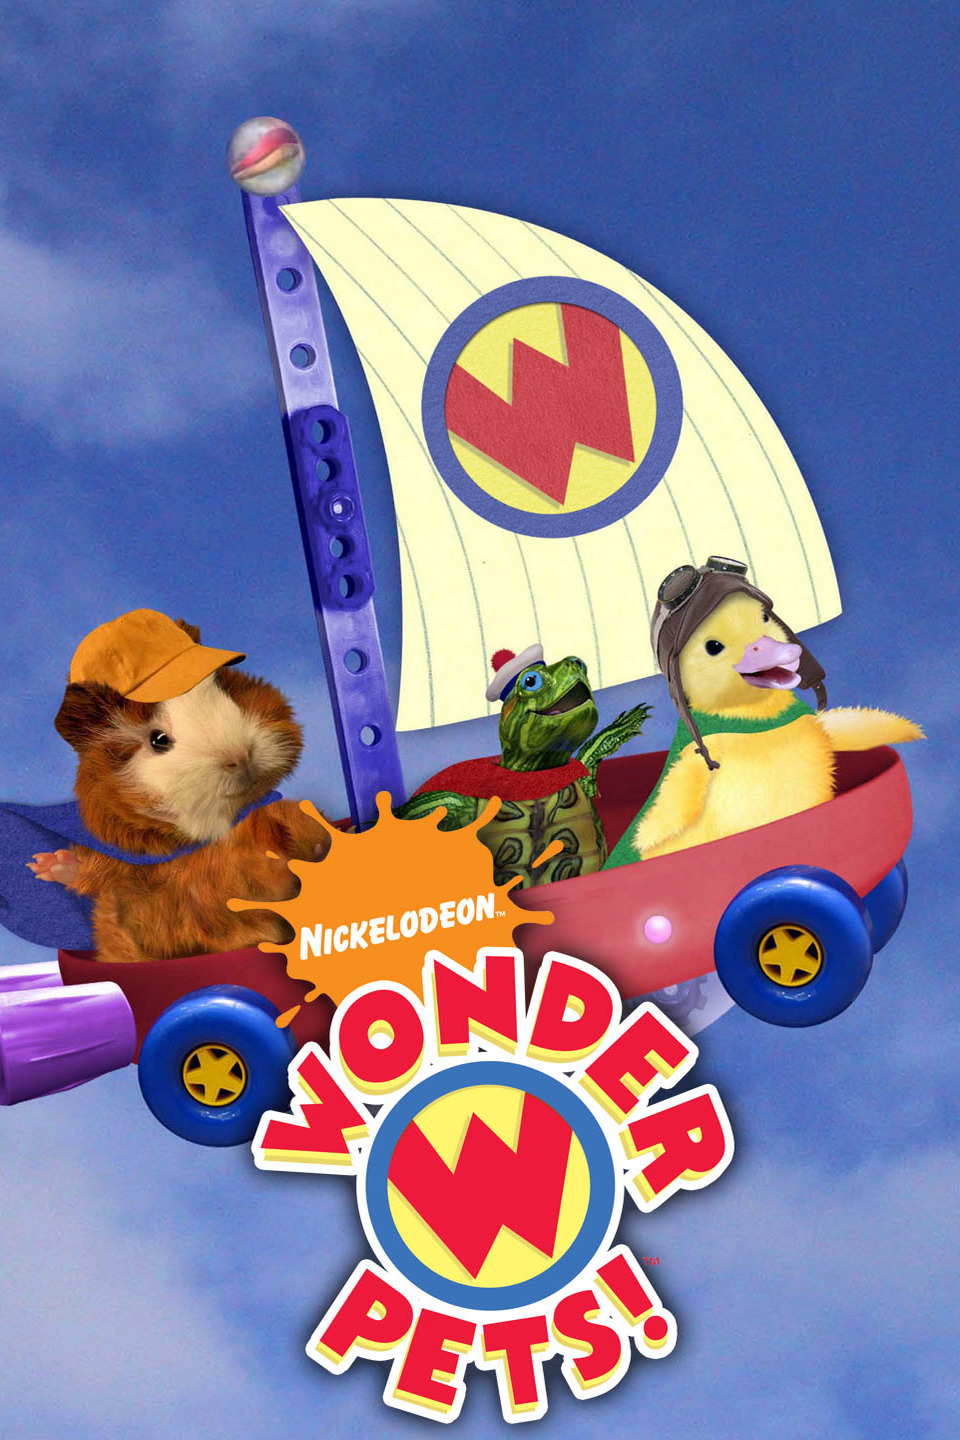 The Wonder Pets! Rotten Tomatoes